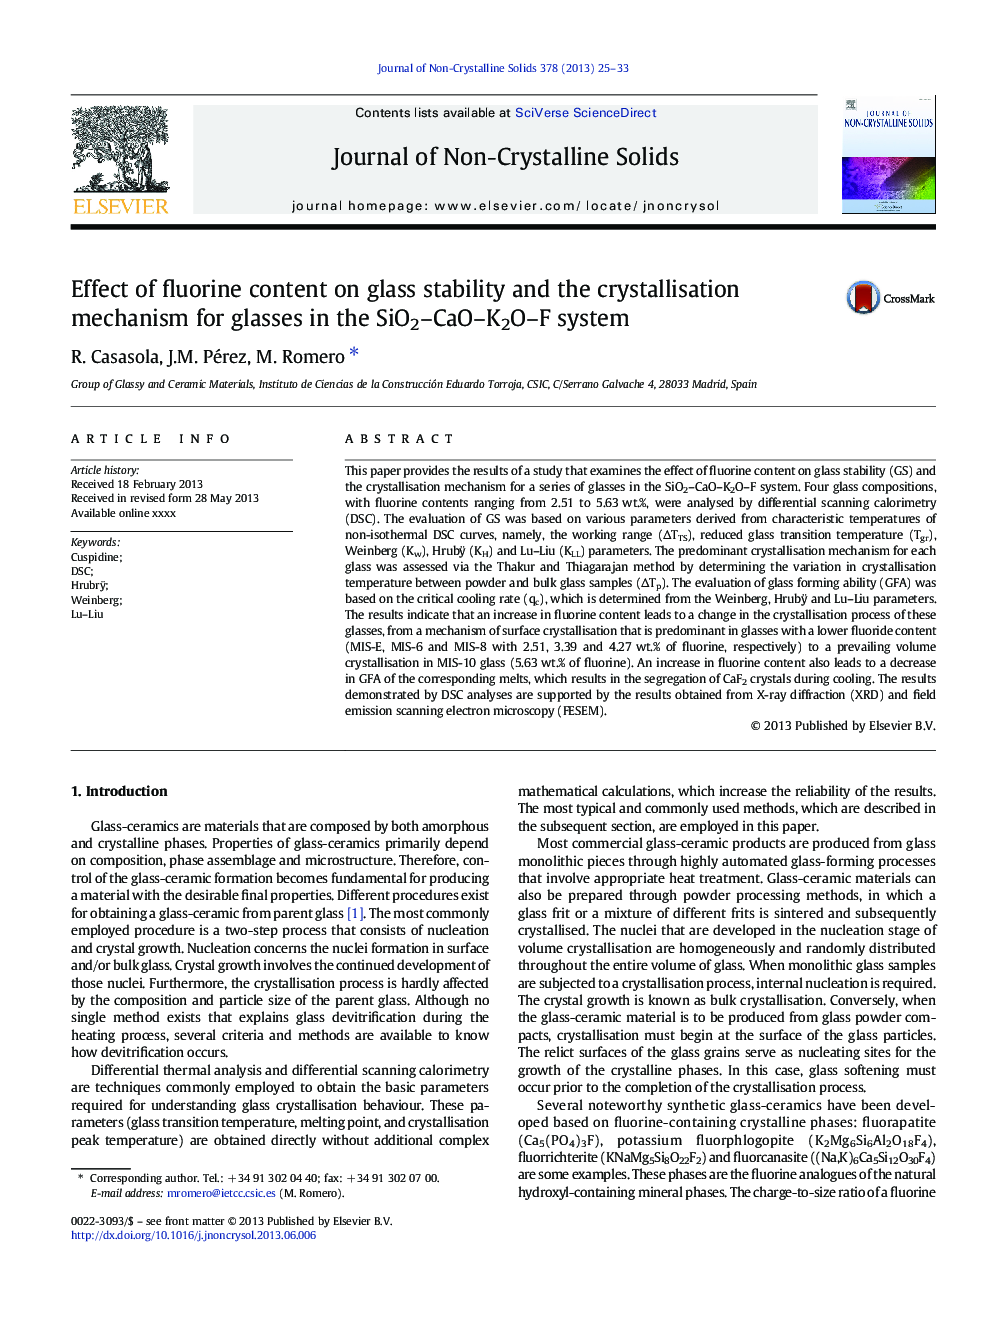 Effect of fluorine content on glass stability and the crystallisation mechanism for glasses in the SiO2-CaO-K2O-F system